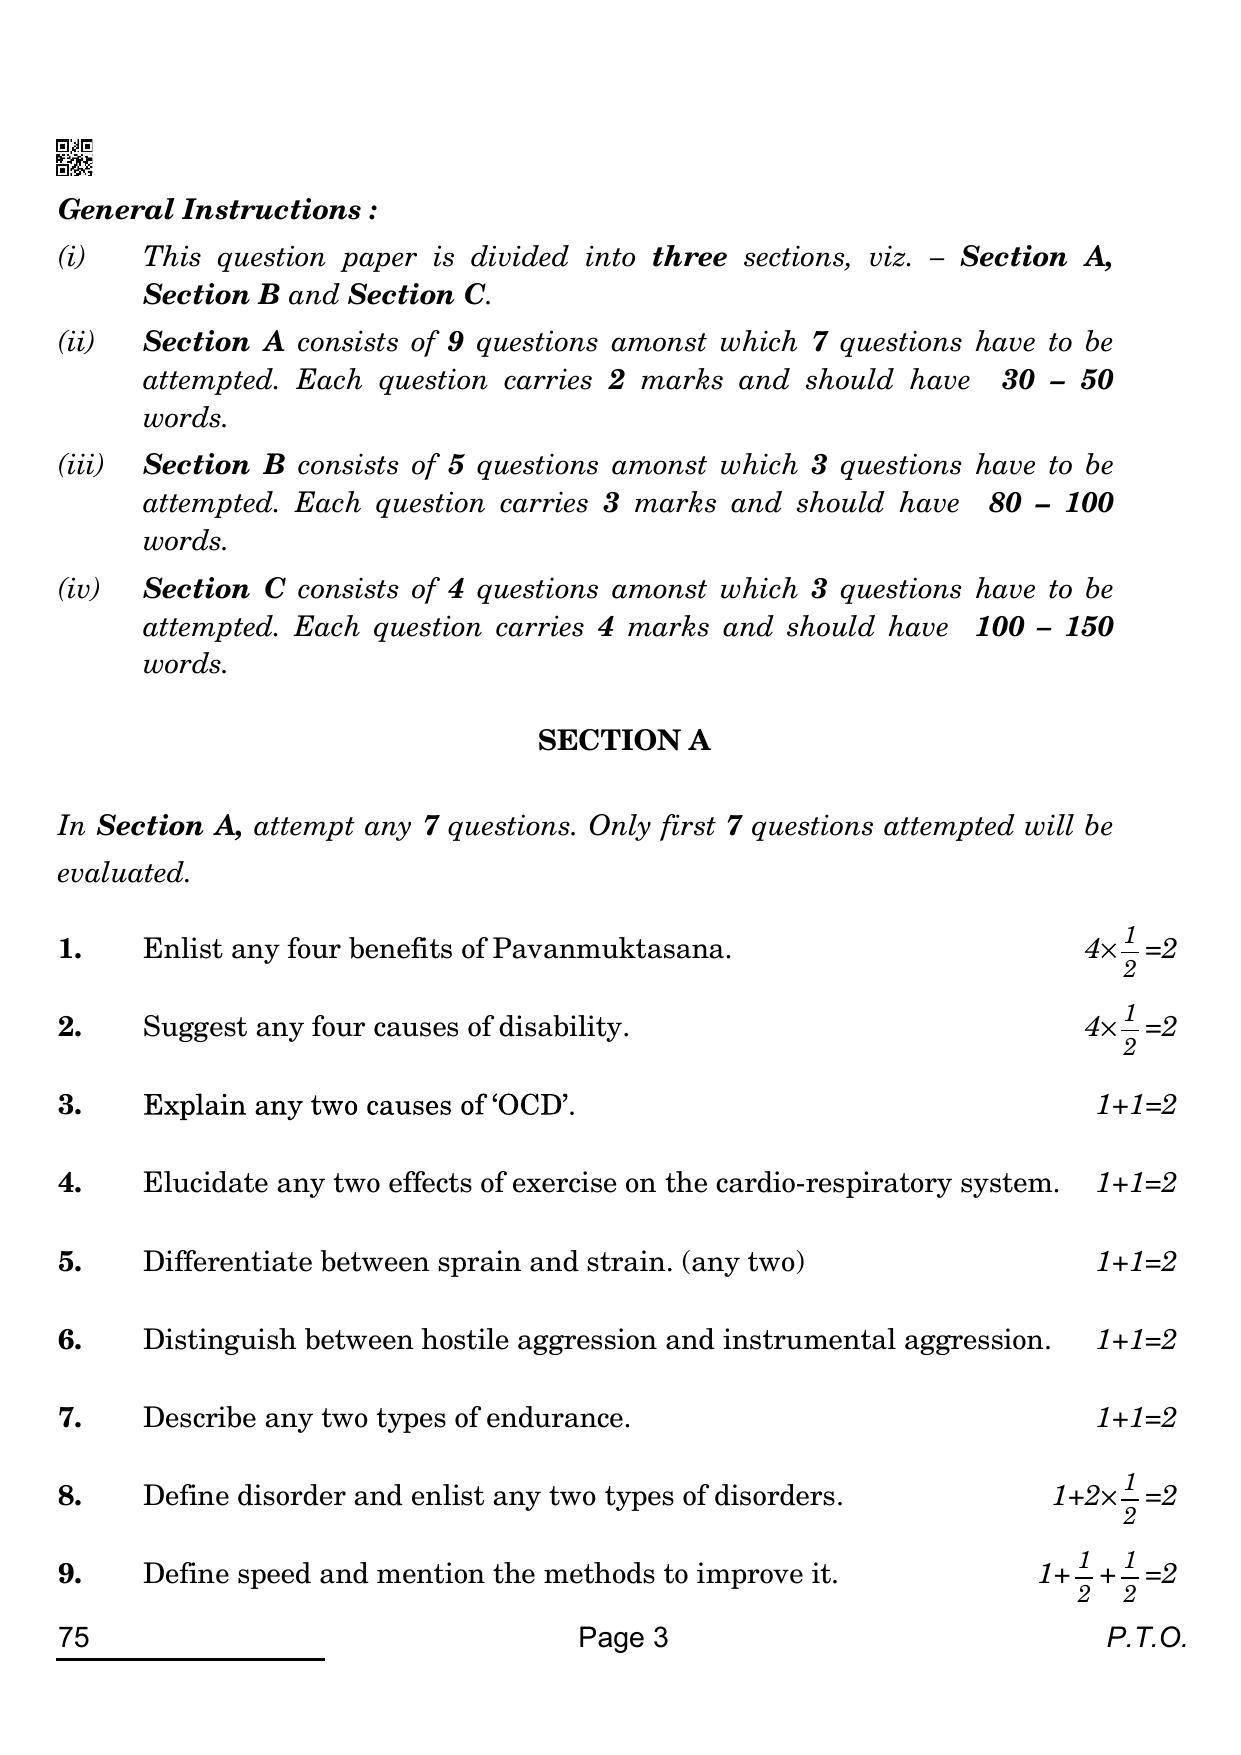 CBSE Class 12 75 PHYSICAL EDUCATION 2022 Compartment Question Paper - Page 3